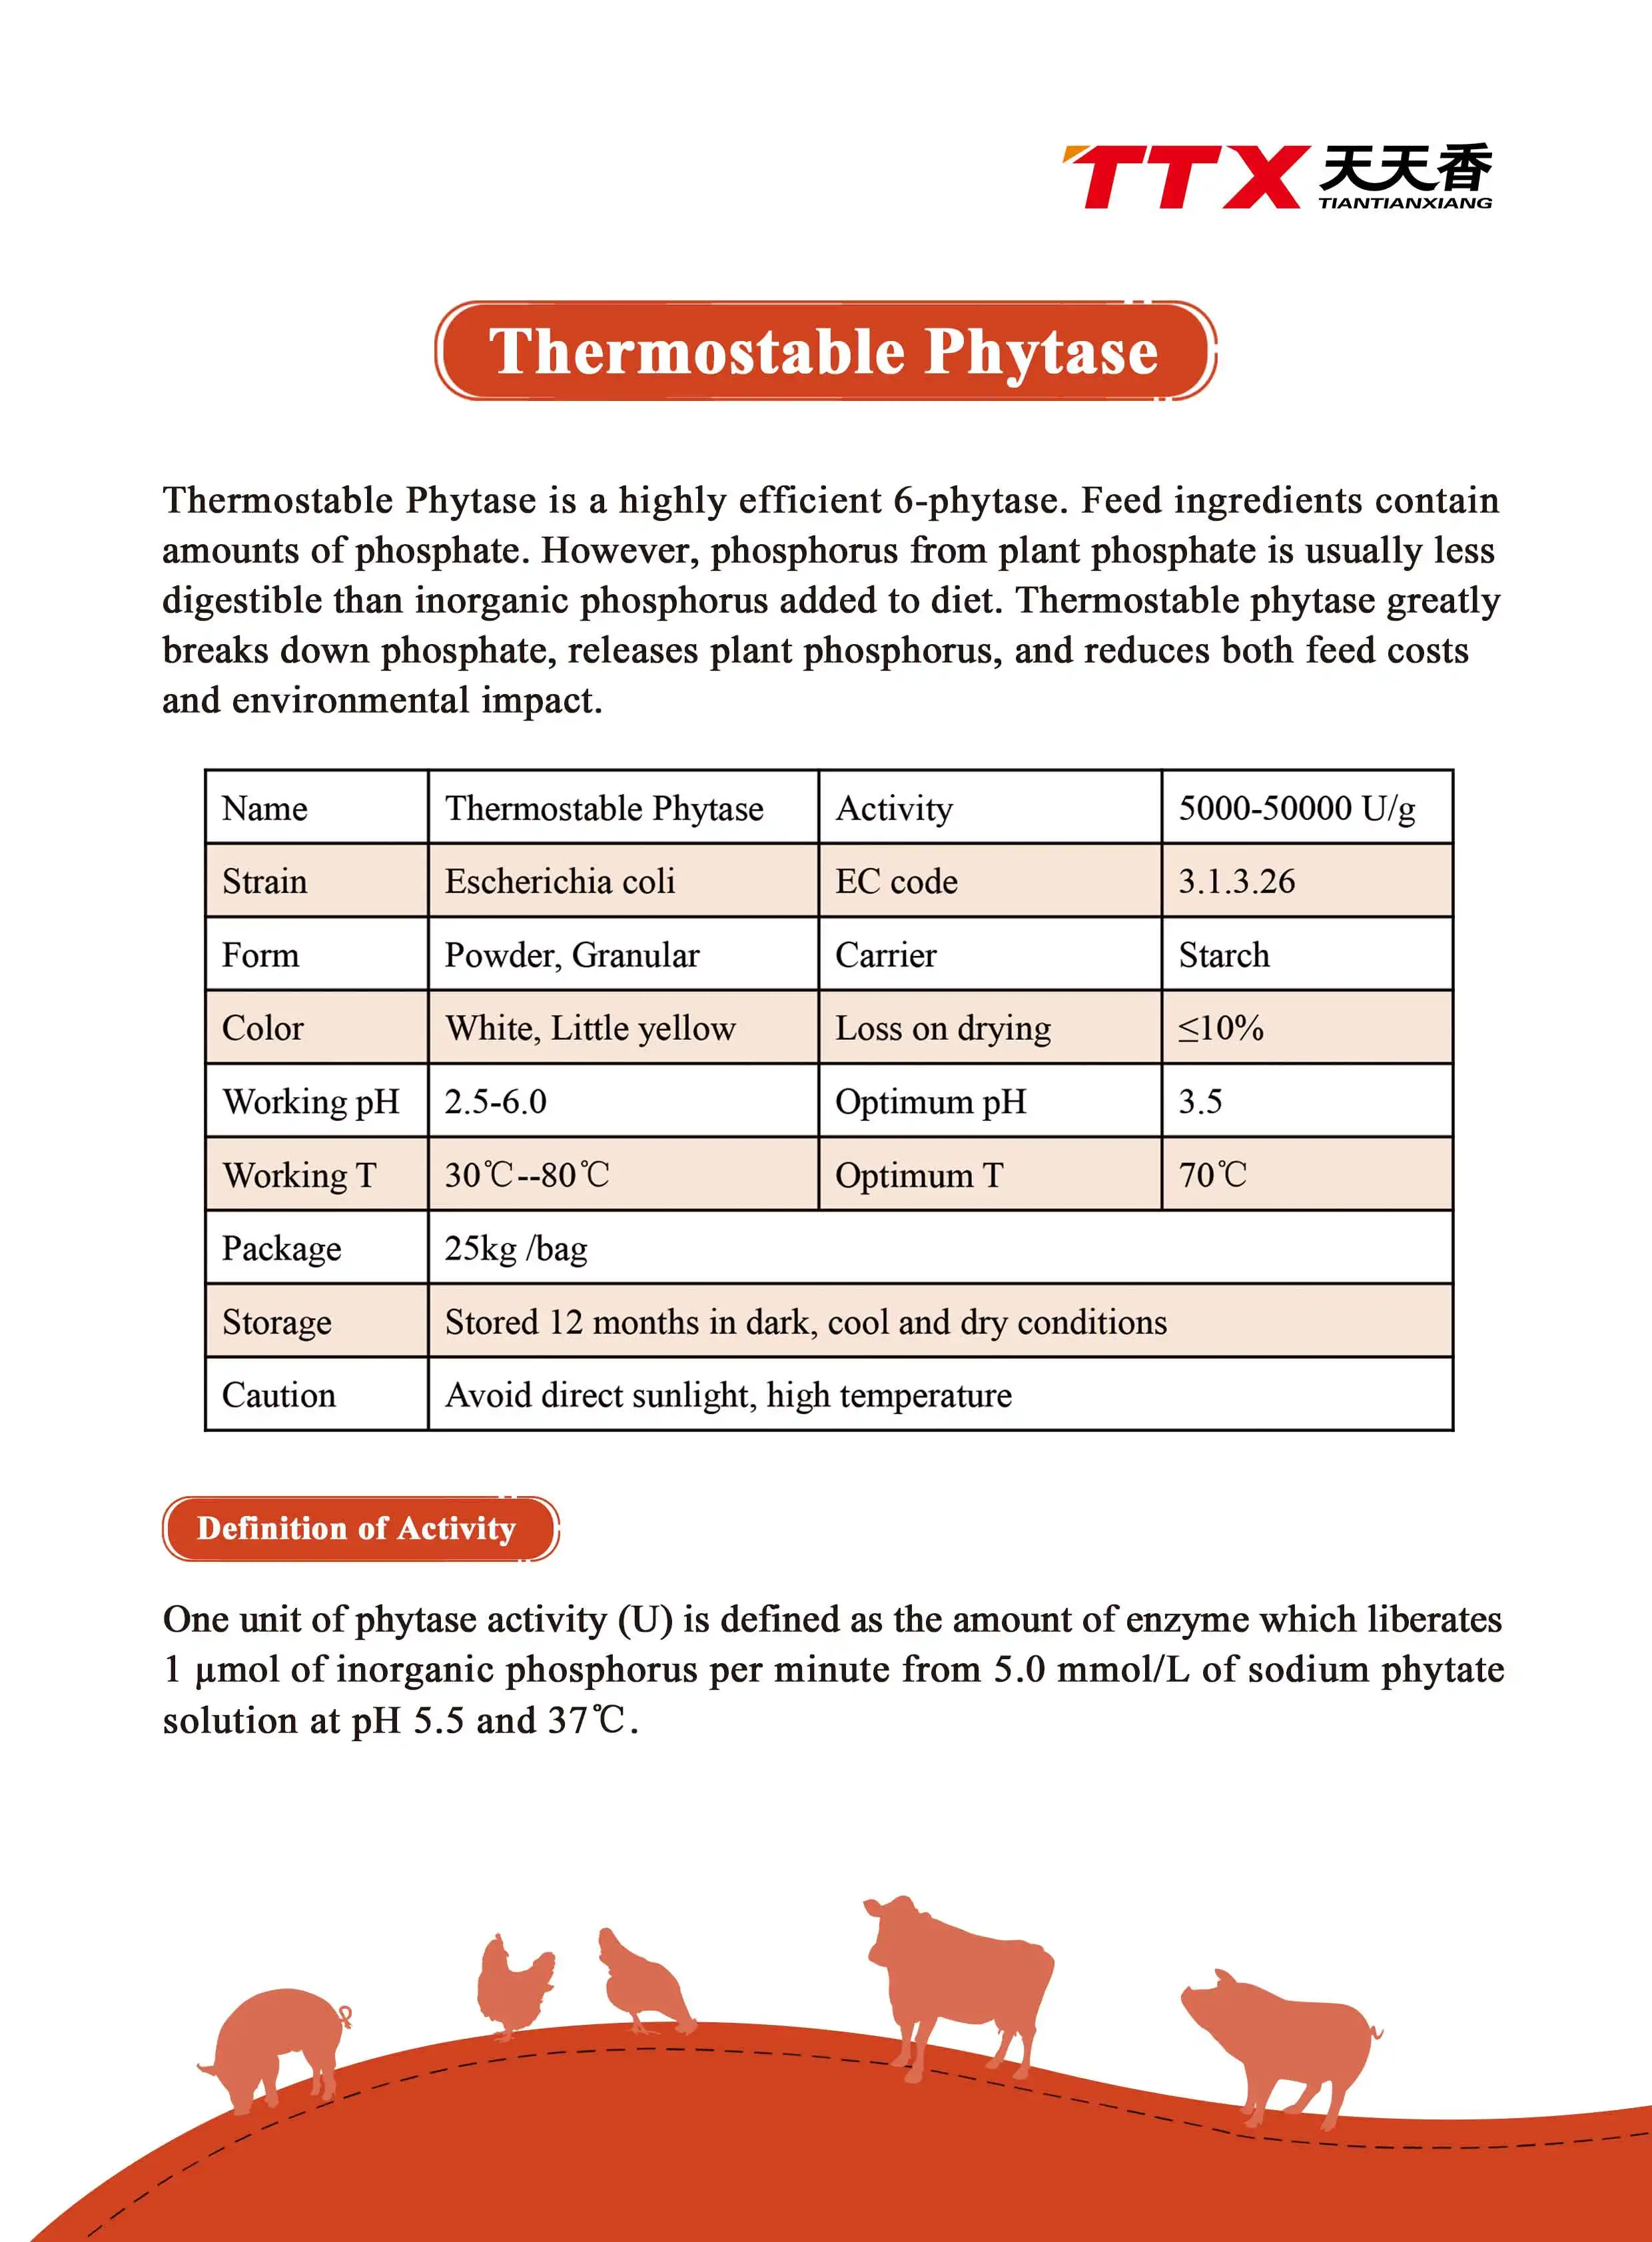 Thermostable phytase